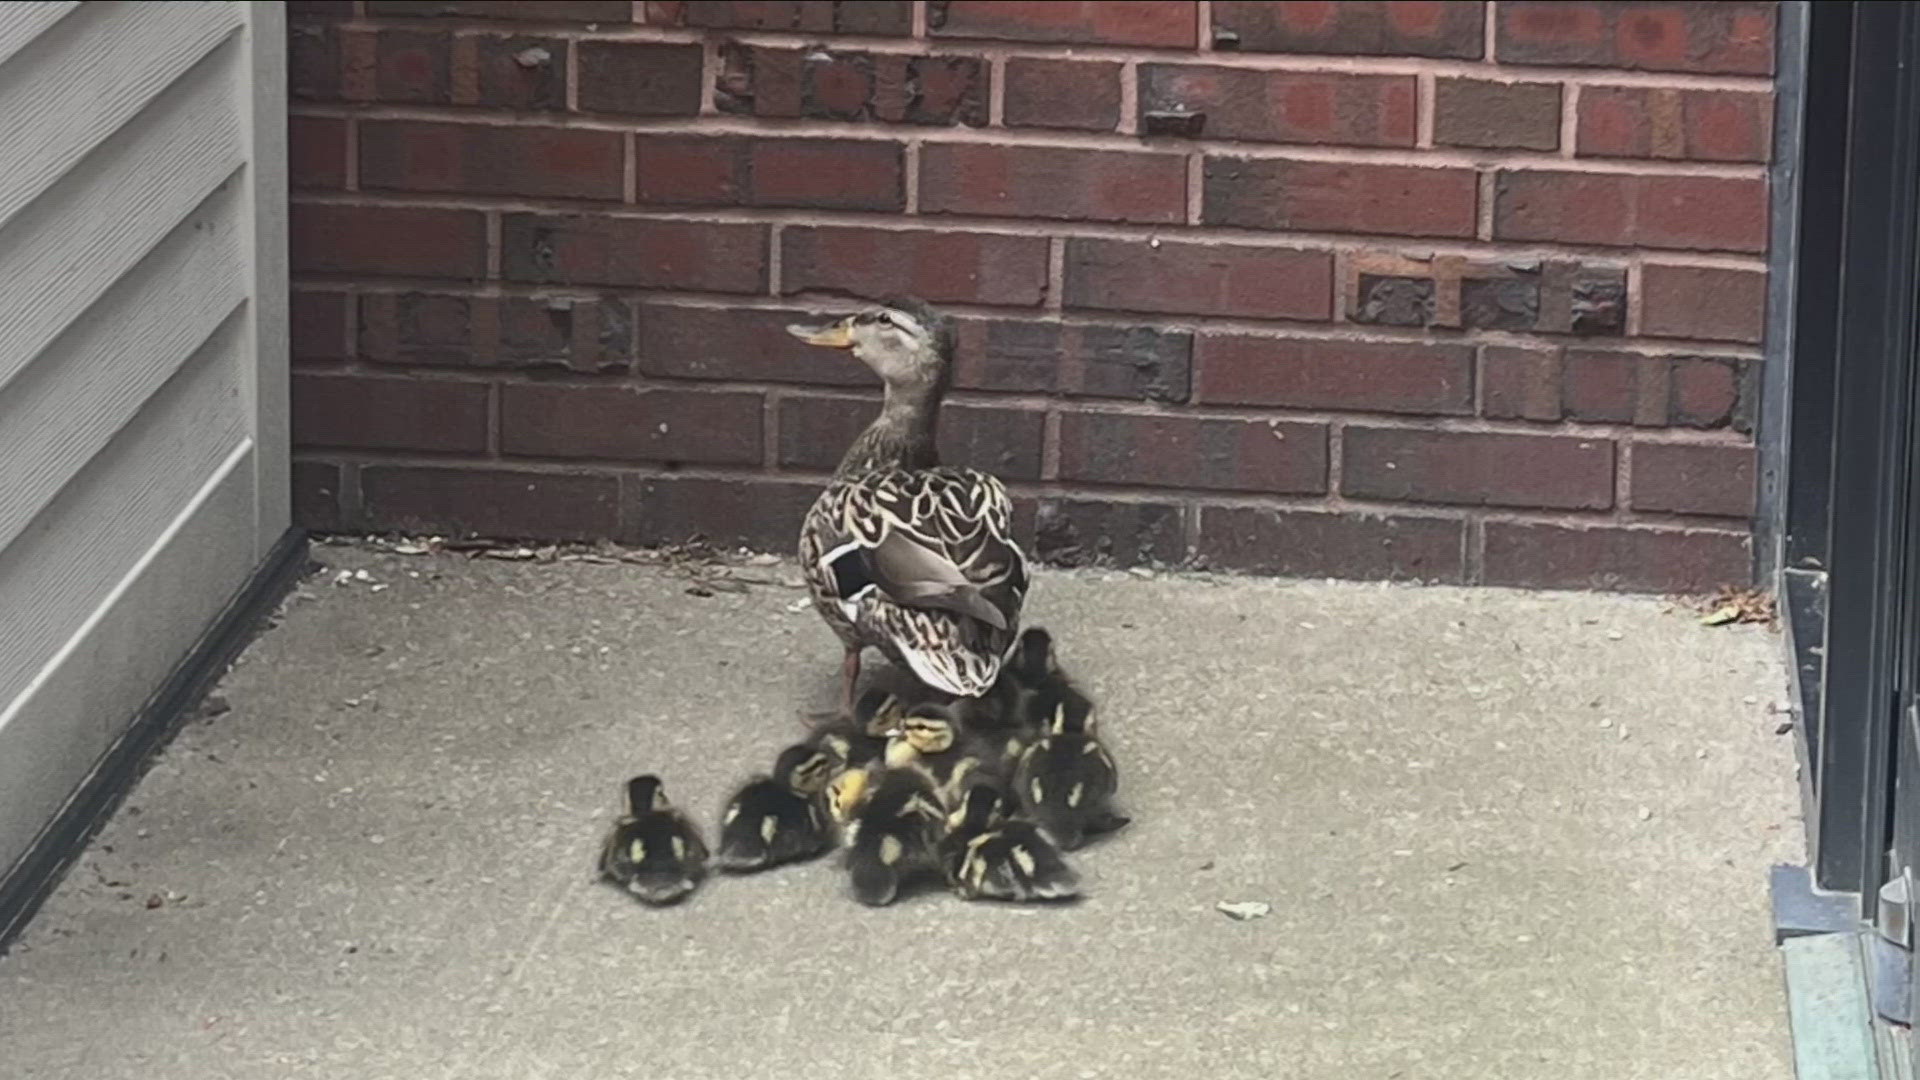 We were all surprised when a Mother duck and her ducklings found themselves right at the front door of our station in Downtown Buffalo